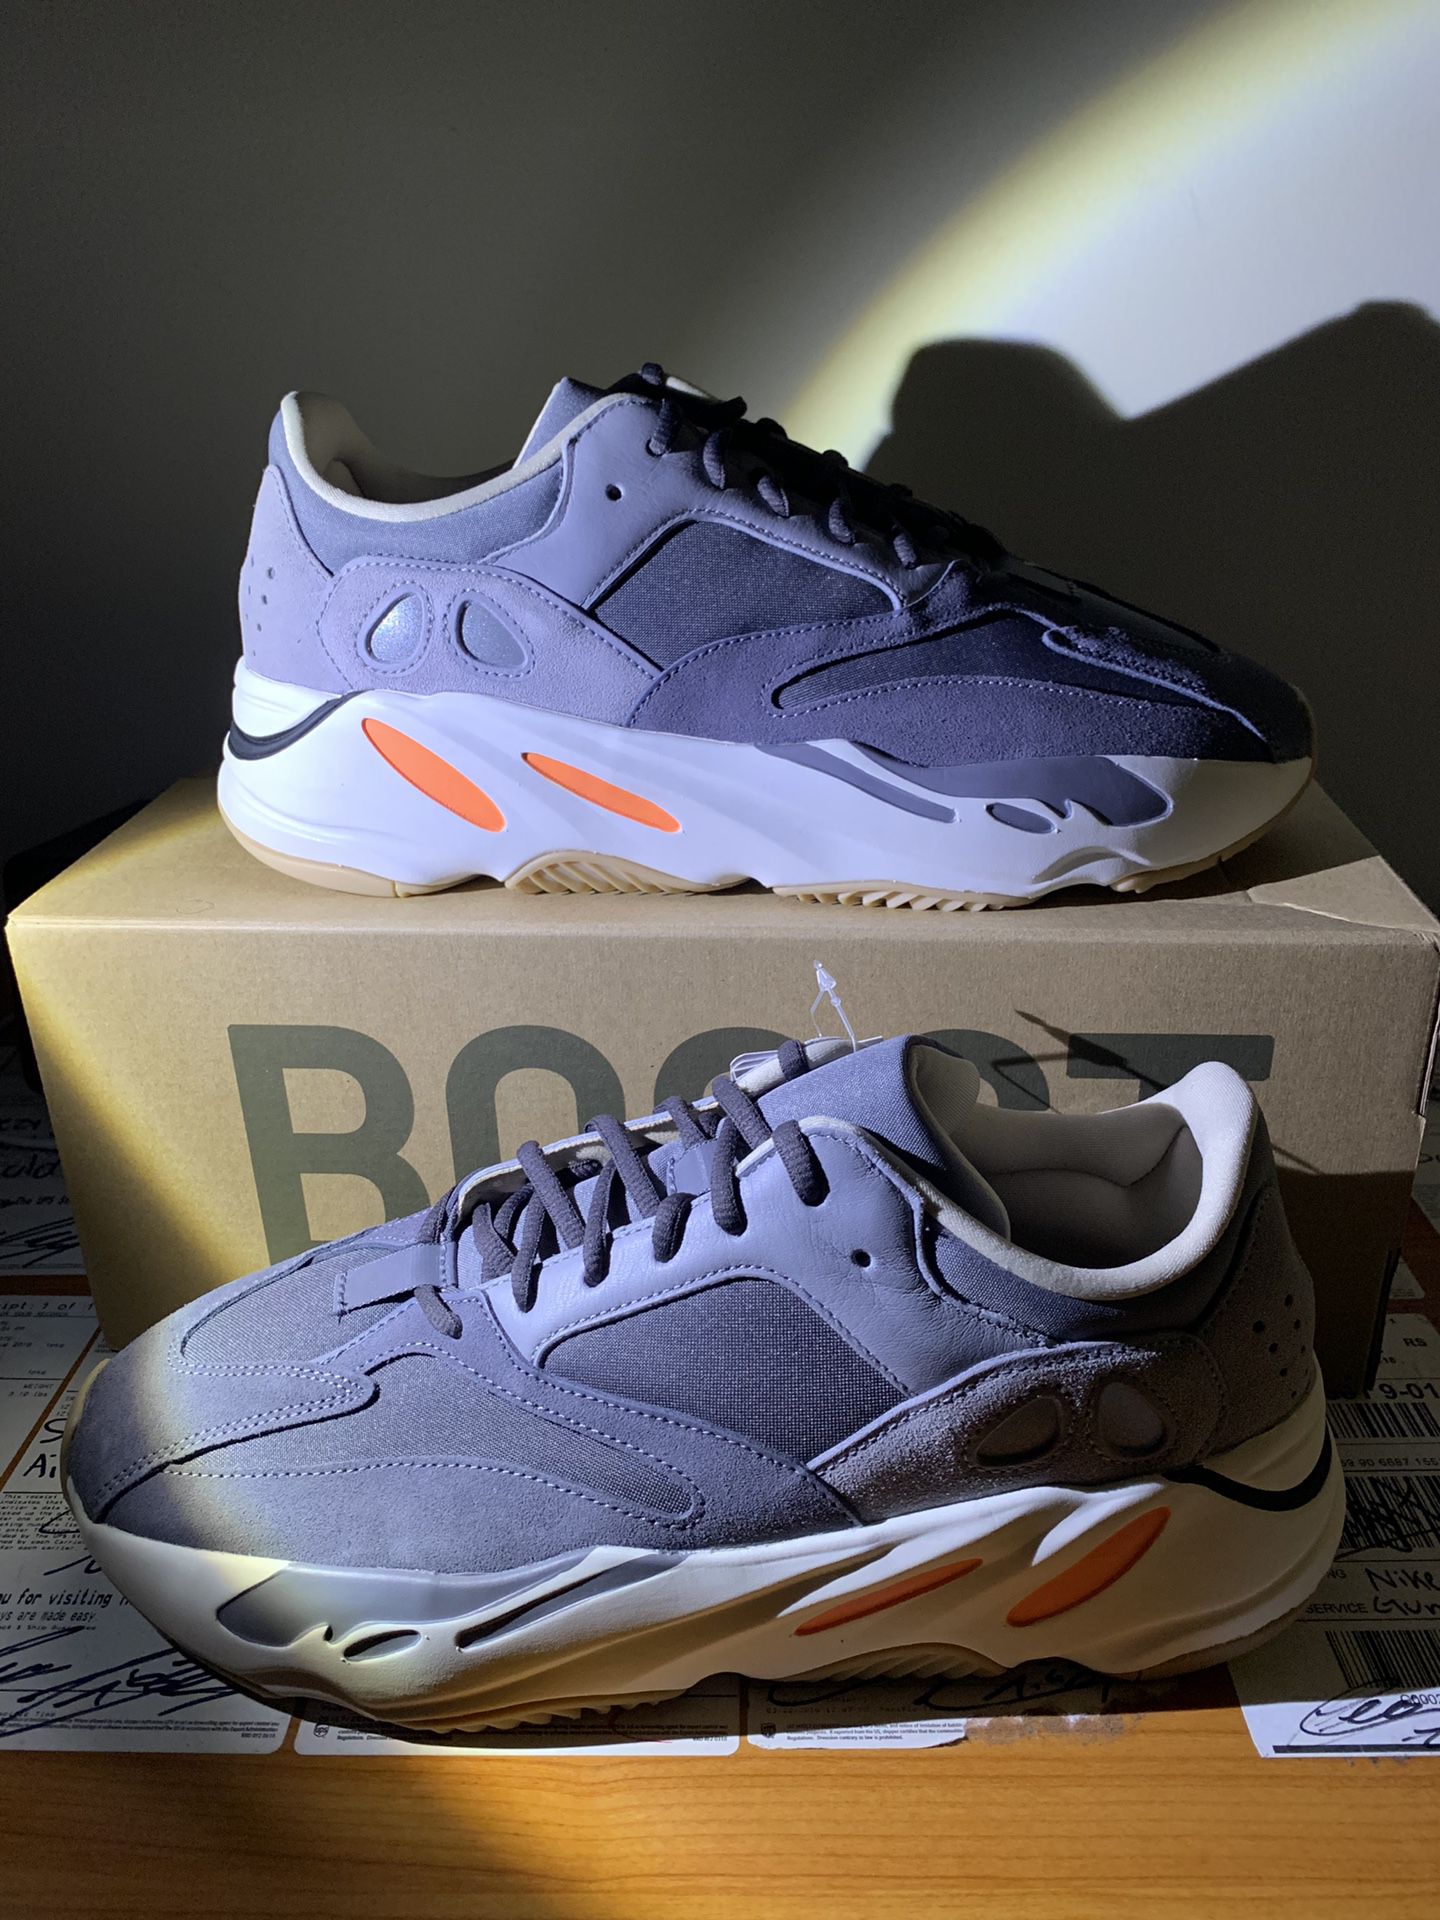 Adidas Yeezy Boost 700 Magnet Size 12.5